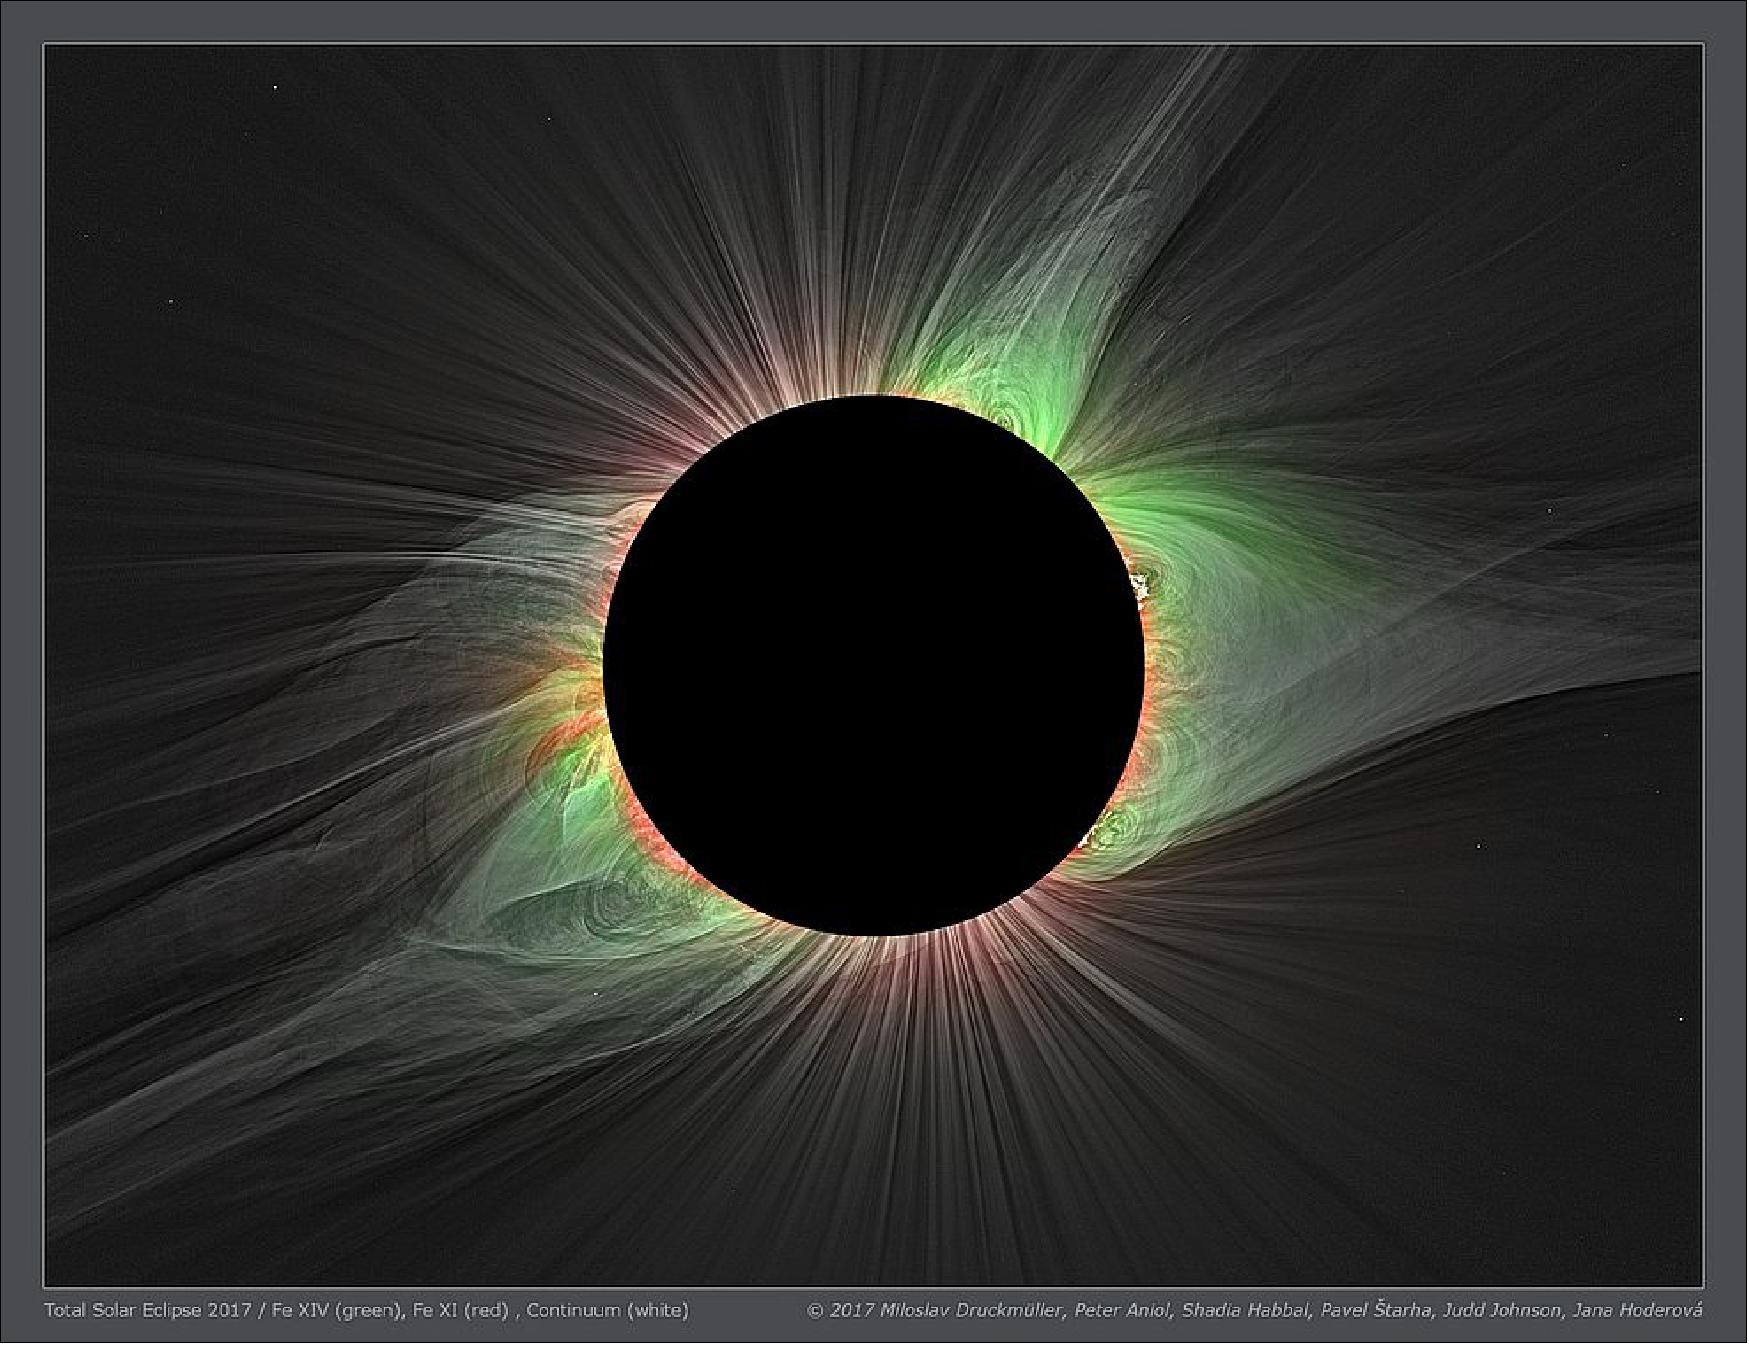 Figure 6: Special filters enable scientists to measure different temperatures in the corona during total solar eclipses, such as this one seen in Mitchell, Oregon, on August 21, 2017. The red light is emitted by charged iron particles at 1.8 million degrees Fahrenheit and the green are those at 3.6 million degrees Fahrenheit. (image credits: Image produced by M. Druckmüller and published in Habbal et al. 2021)